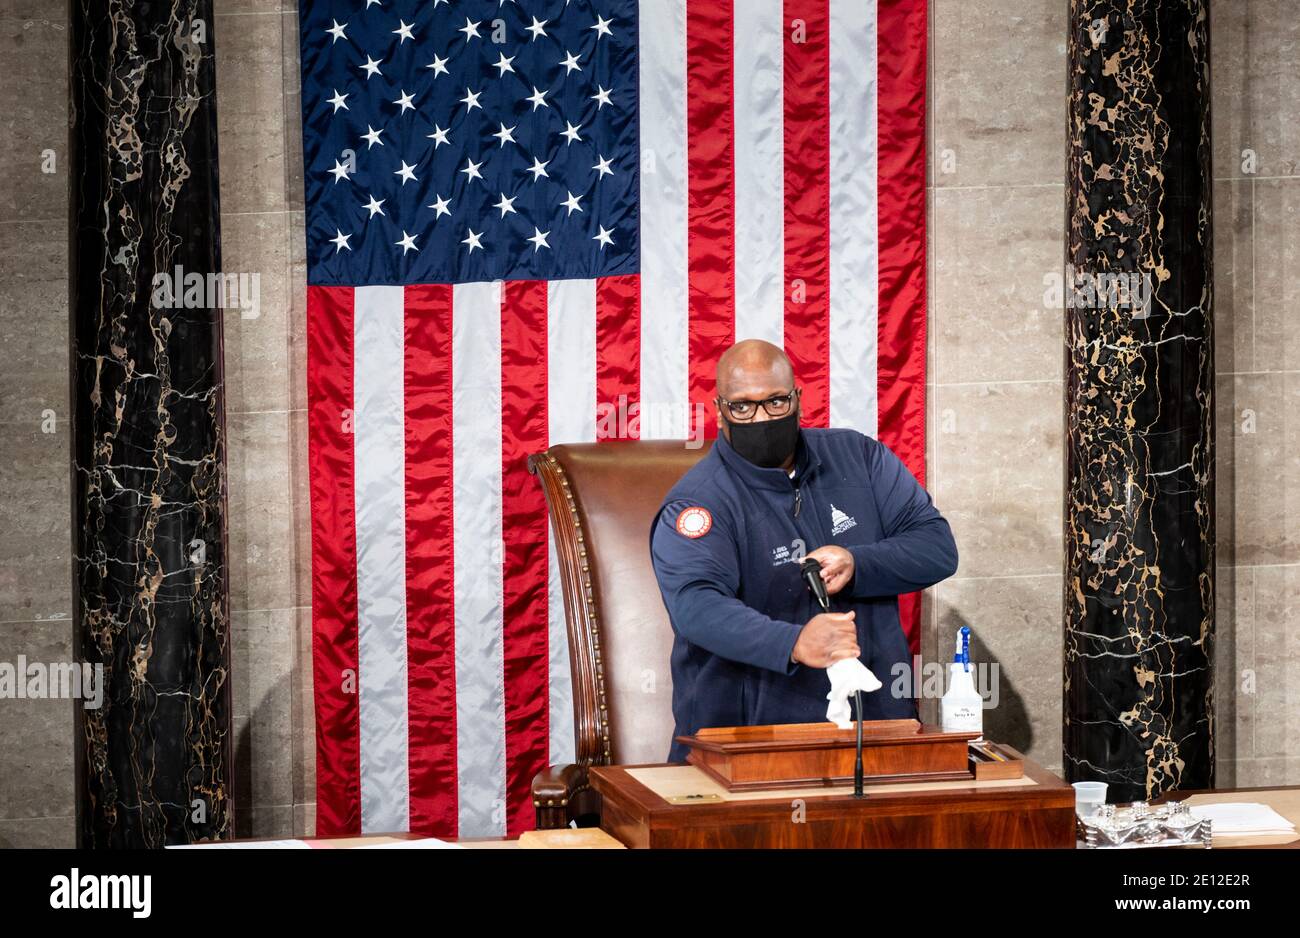 Washington, United States Of America. 03rd Jan, 2021. United States Capitol workers disinfect the House floor in the Capitol before members of the 117th Congress are sworn in on Sunday, January 3, 2021.Credit: Bill Clark/Pool via CNP | usage worldwide Credit: dpa/Alamy Live News Stock Photo